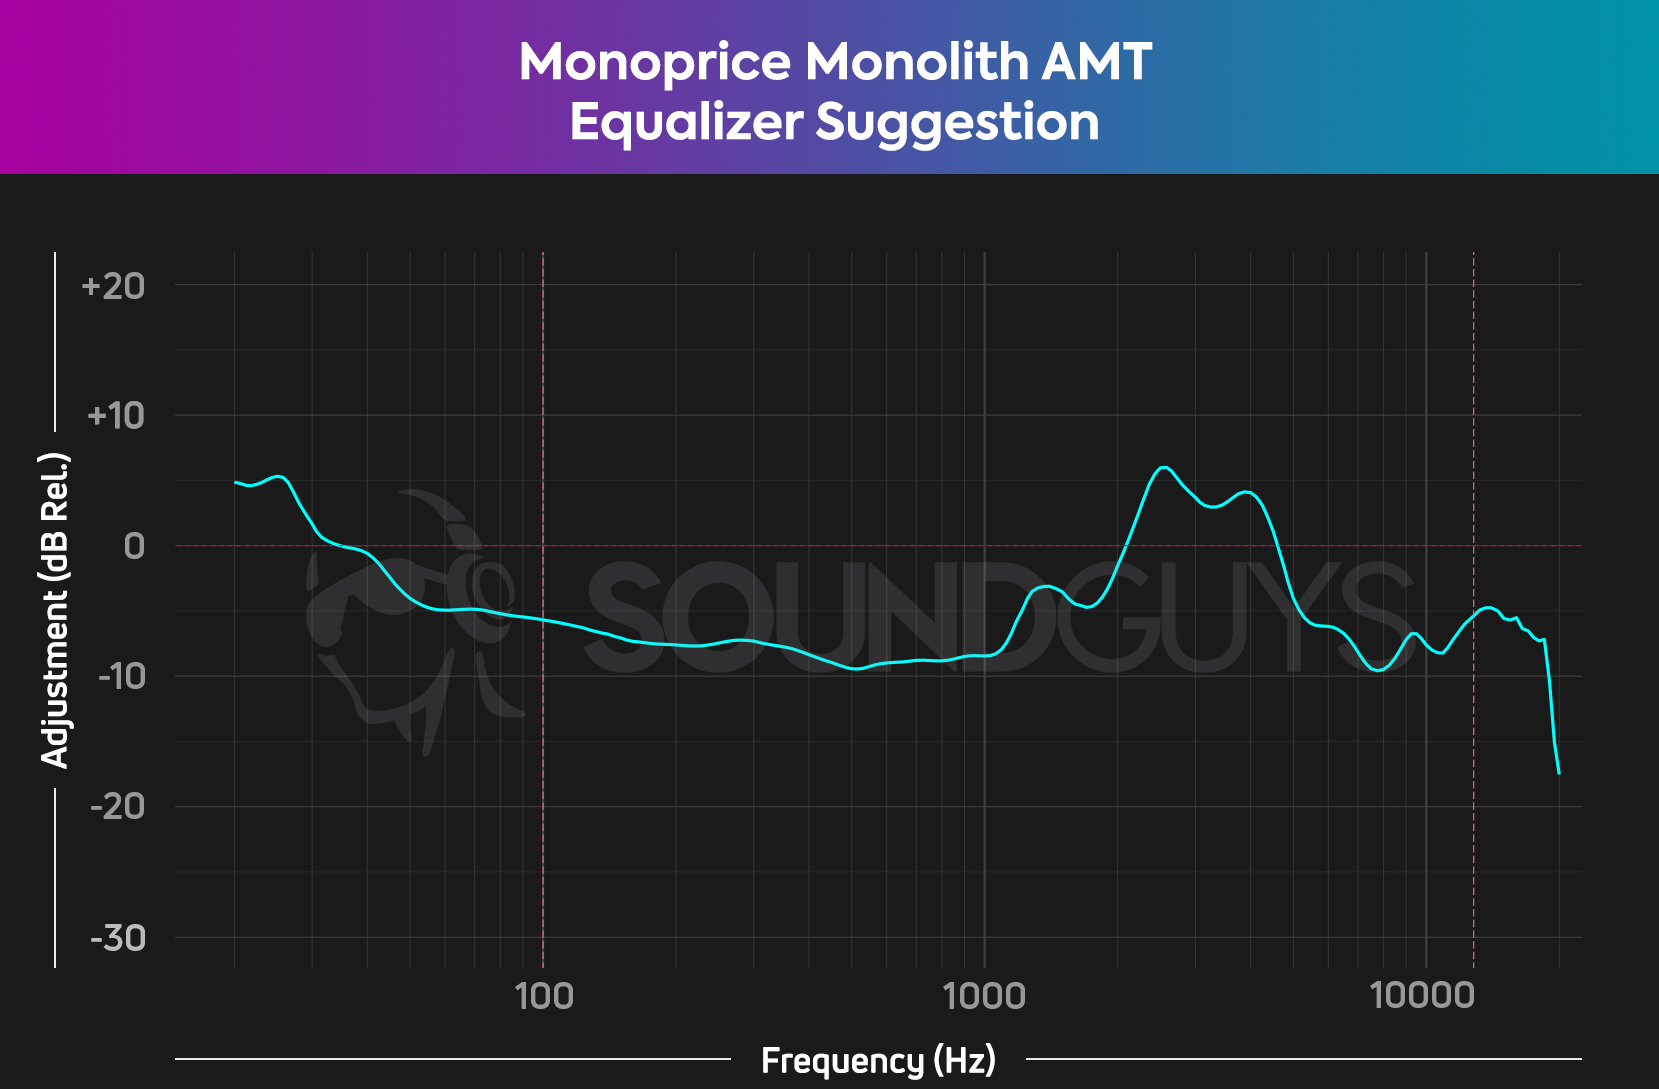 A plot showing the suggested equalizer settings for the Monoprice Monolith, with heavy cuts to most ranges outside of the highs.